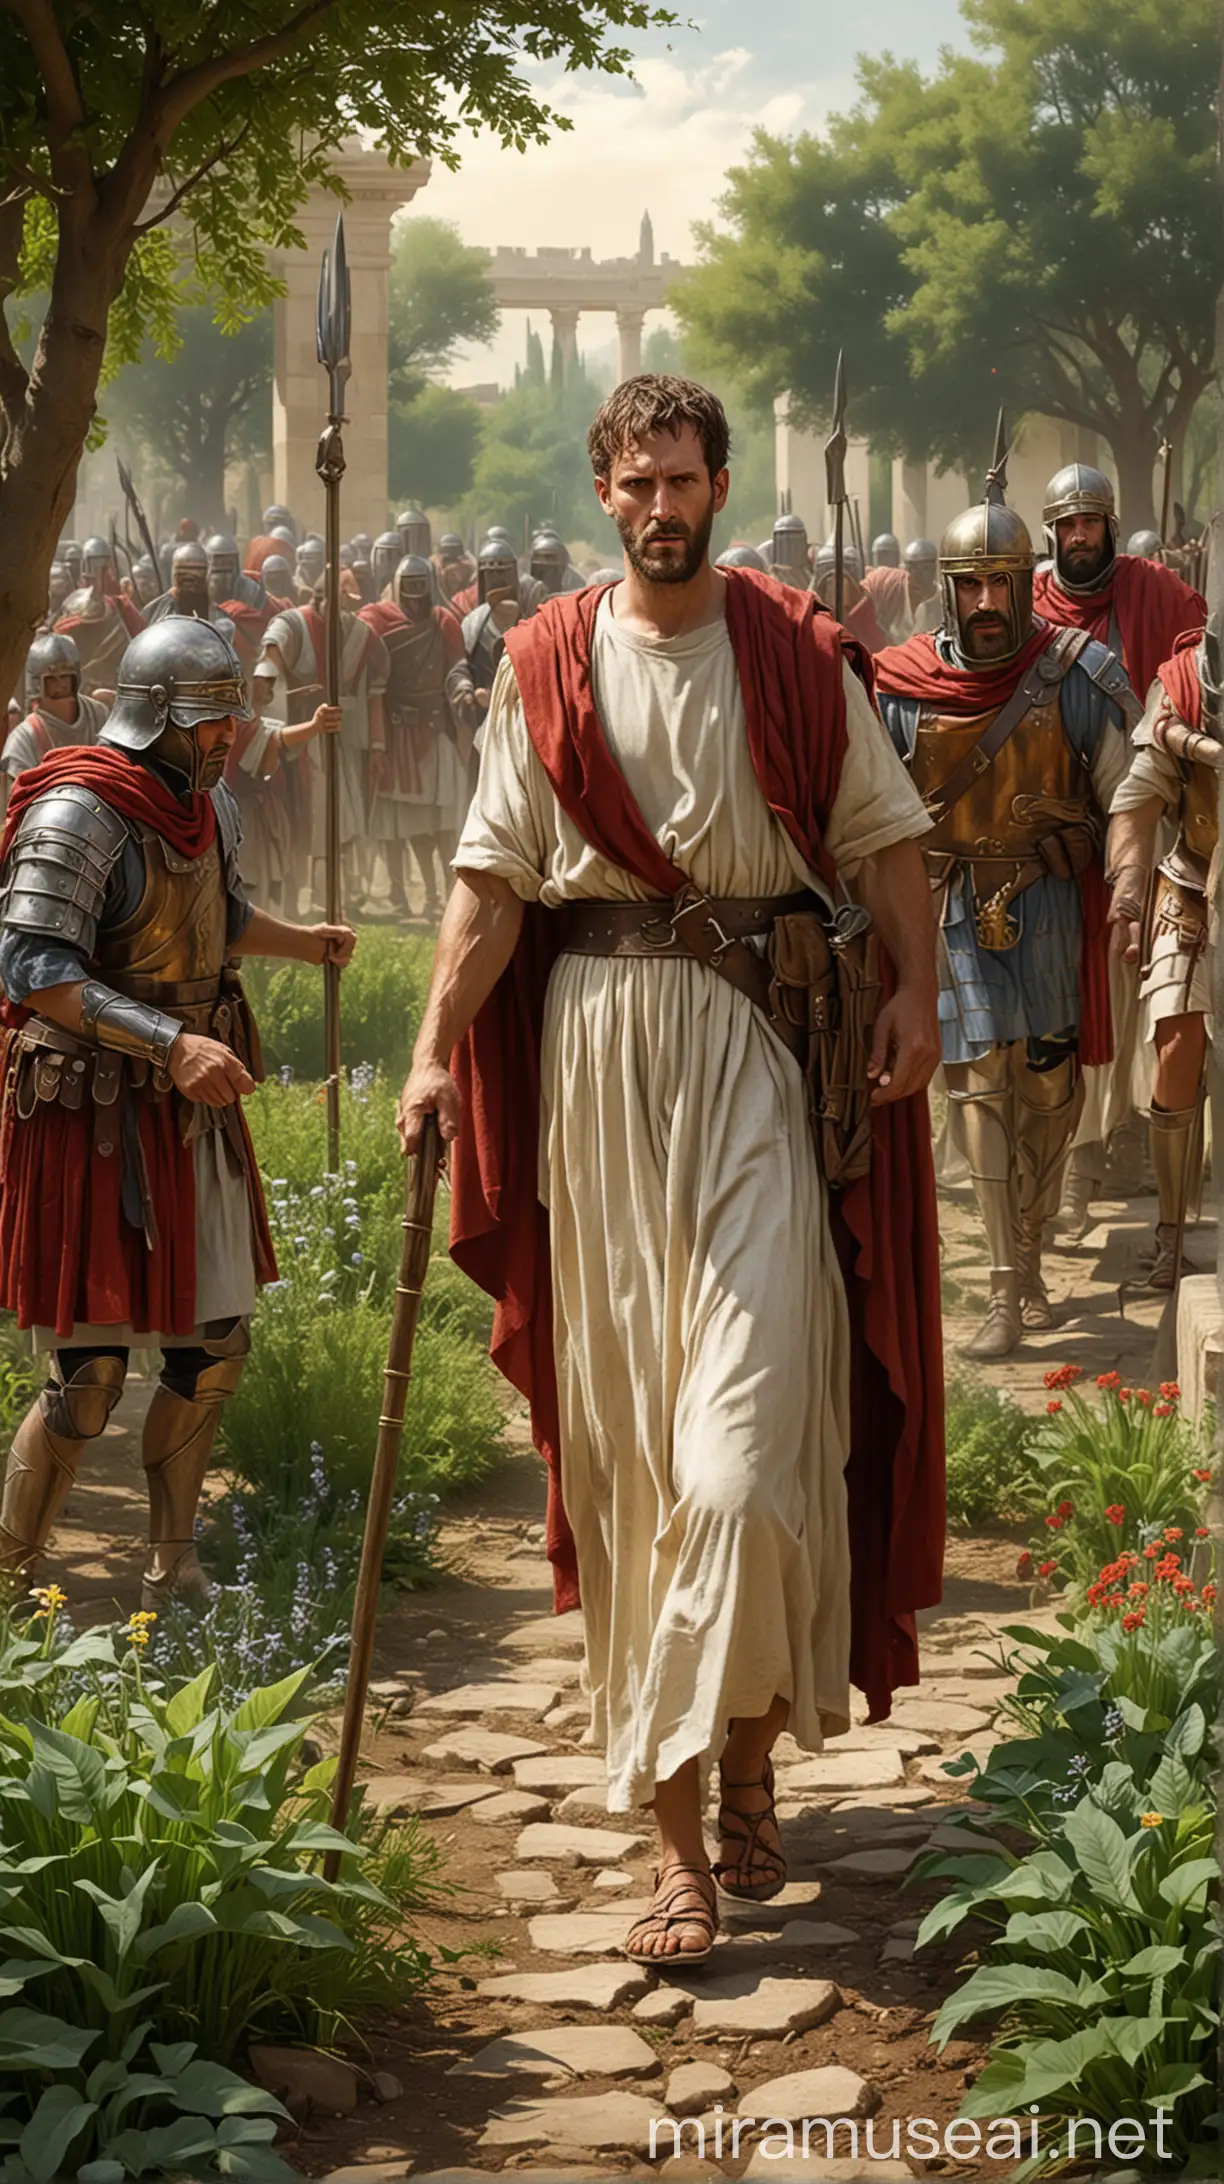 High Priests Servant Malchus with Roman Soldiers in the Garden